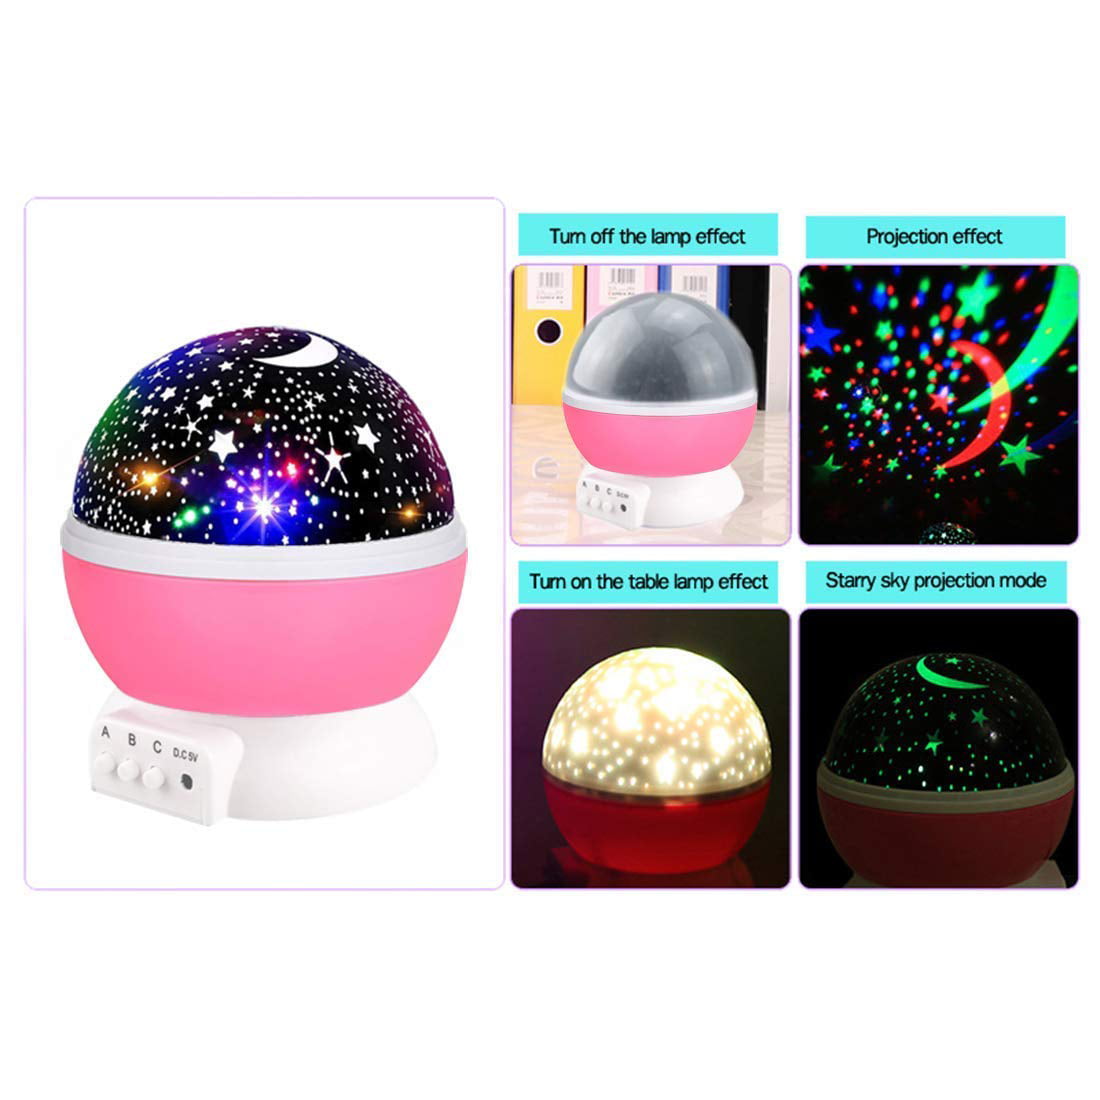 SUIBIAN Star Projector Lamp Led The Charge Rotating Atmosphere Nightlight Gifts Children Birthday Gift